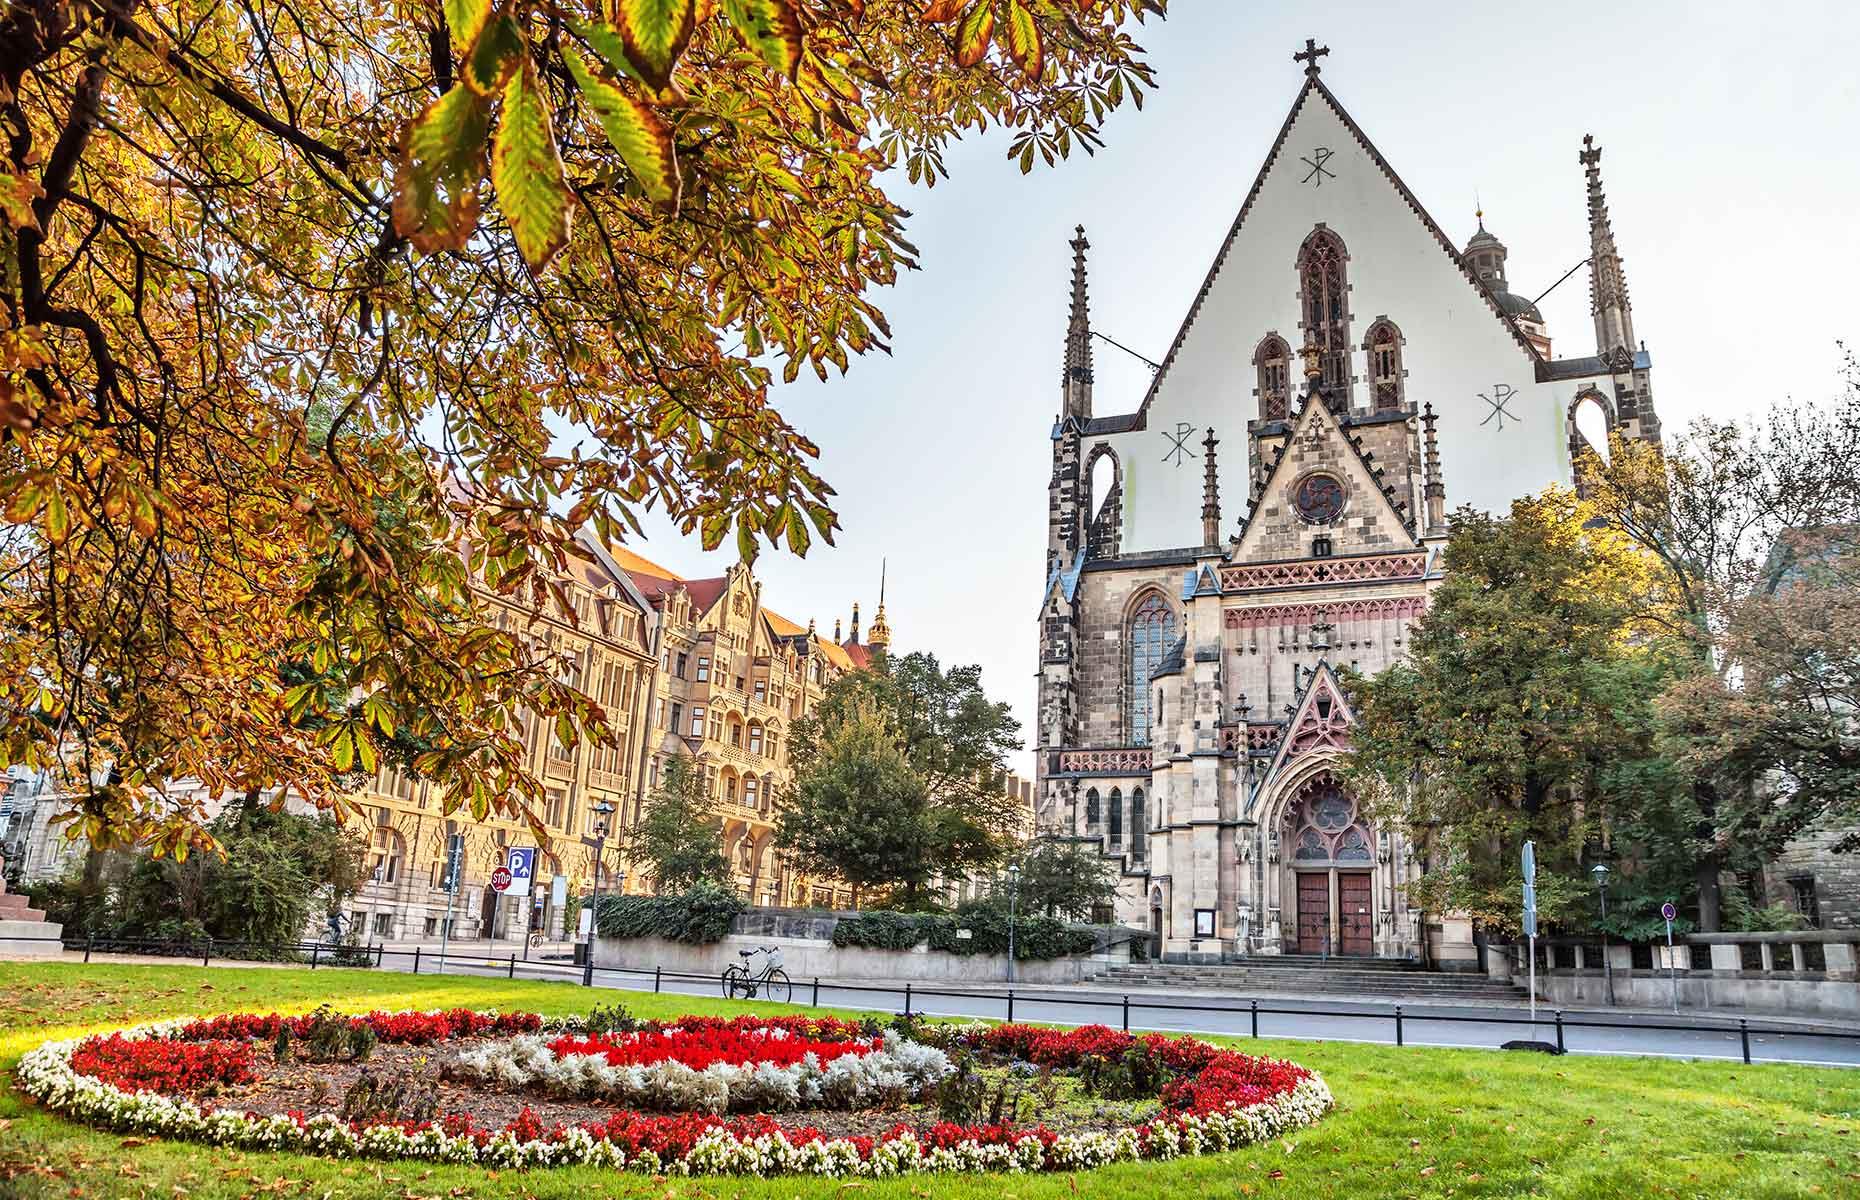 <p><a href="https://www.loveexploring.com/news/86740/a-weekend-in-leipzig-the-german-masterpiece">Leipzig</a> easily commands a place on this top 20 list. The heavily populated city has a thousand-year-old history which is certainly the theme on this recommended walking route. Start at the botanical gardens and stroll past a roster of sights including the New Town Hall, Bach Museum, Marktplatz and the Stadtgeschichtliches Museum, culminating with a visit to Leipzig Zoo. This 45-minute walk covers 2.2 miles (3.6km) in 4,724 steps, but you could set aside a full day to give the city justice.</p>